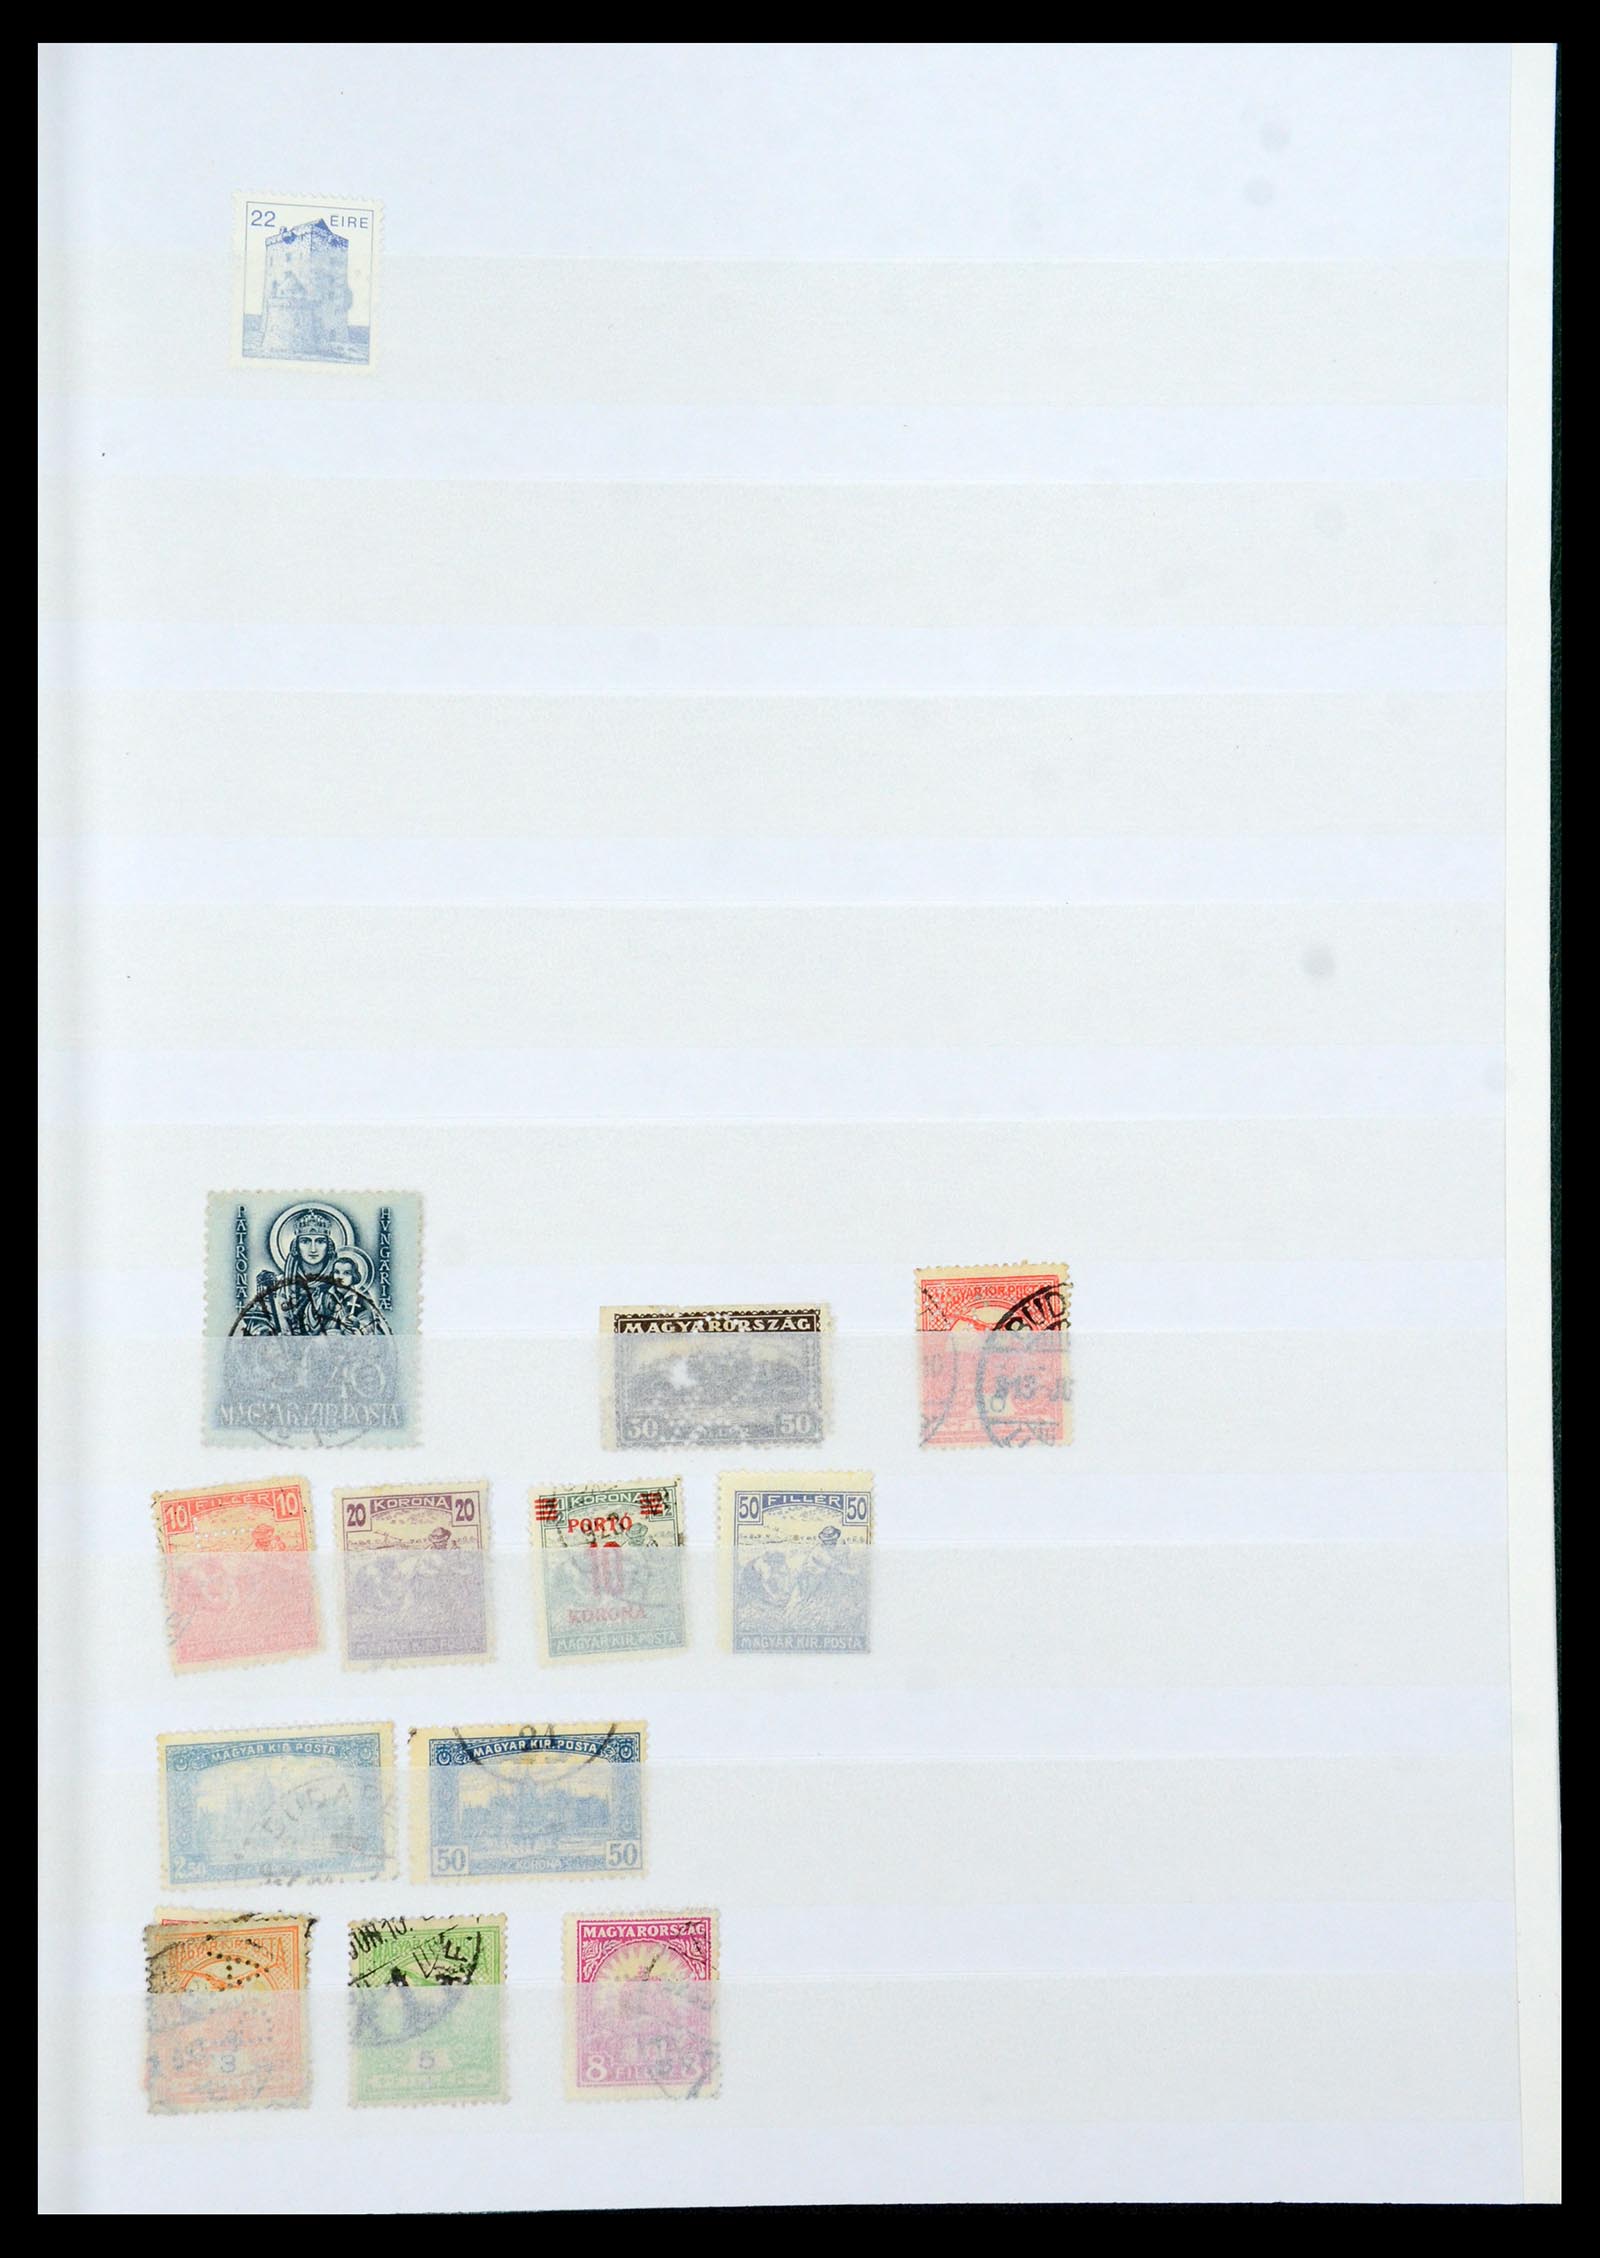 36111 069 - Stamp collection 36111 France perfins 1880-1950.